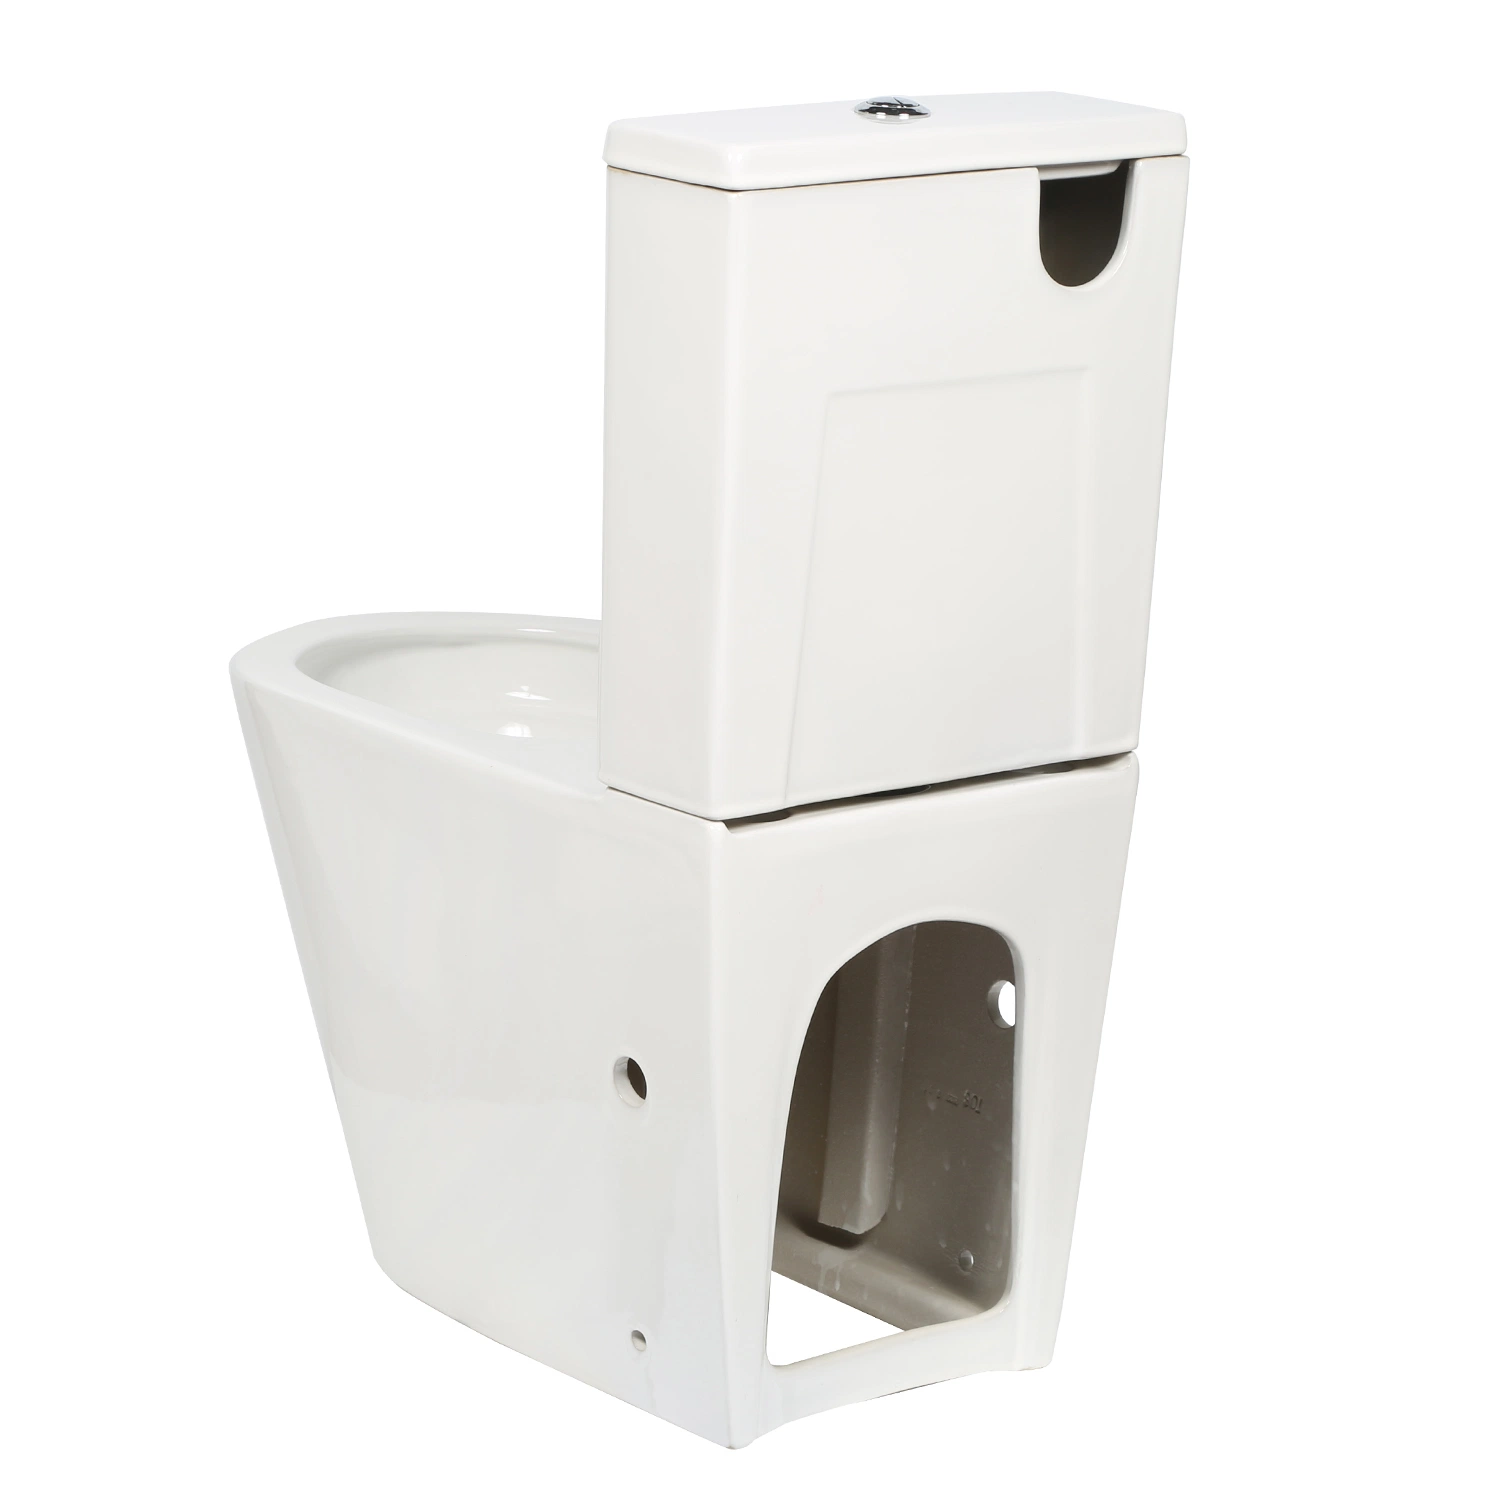 Factory Supply Sanitary Ware White Color Round Water Closet Wc Washdown Two Piece P-Trap Toilet